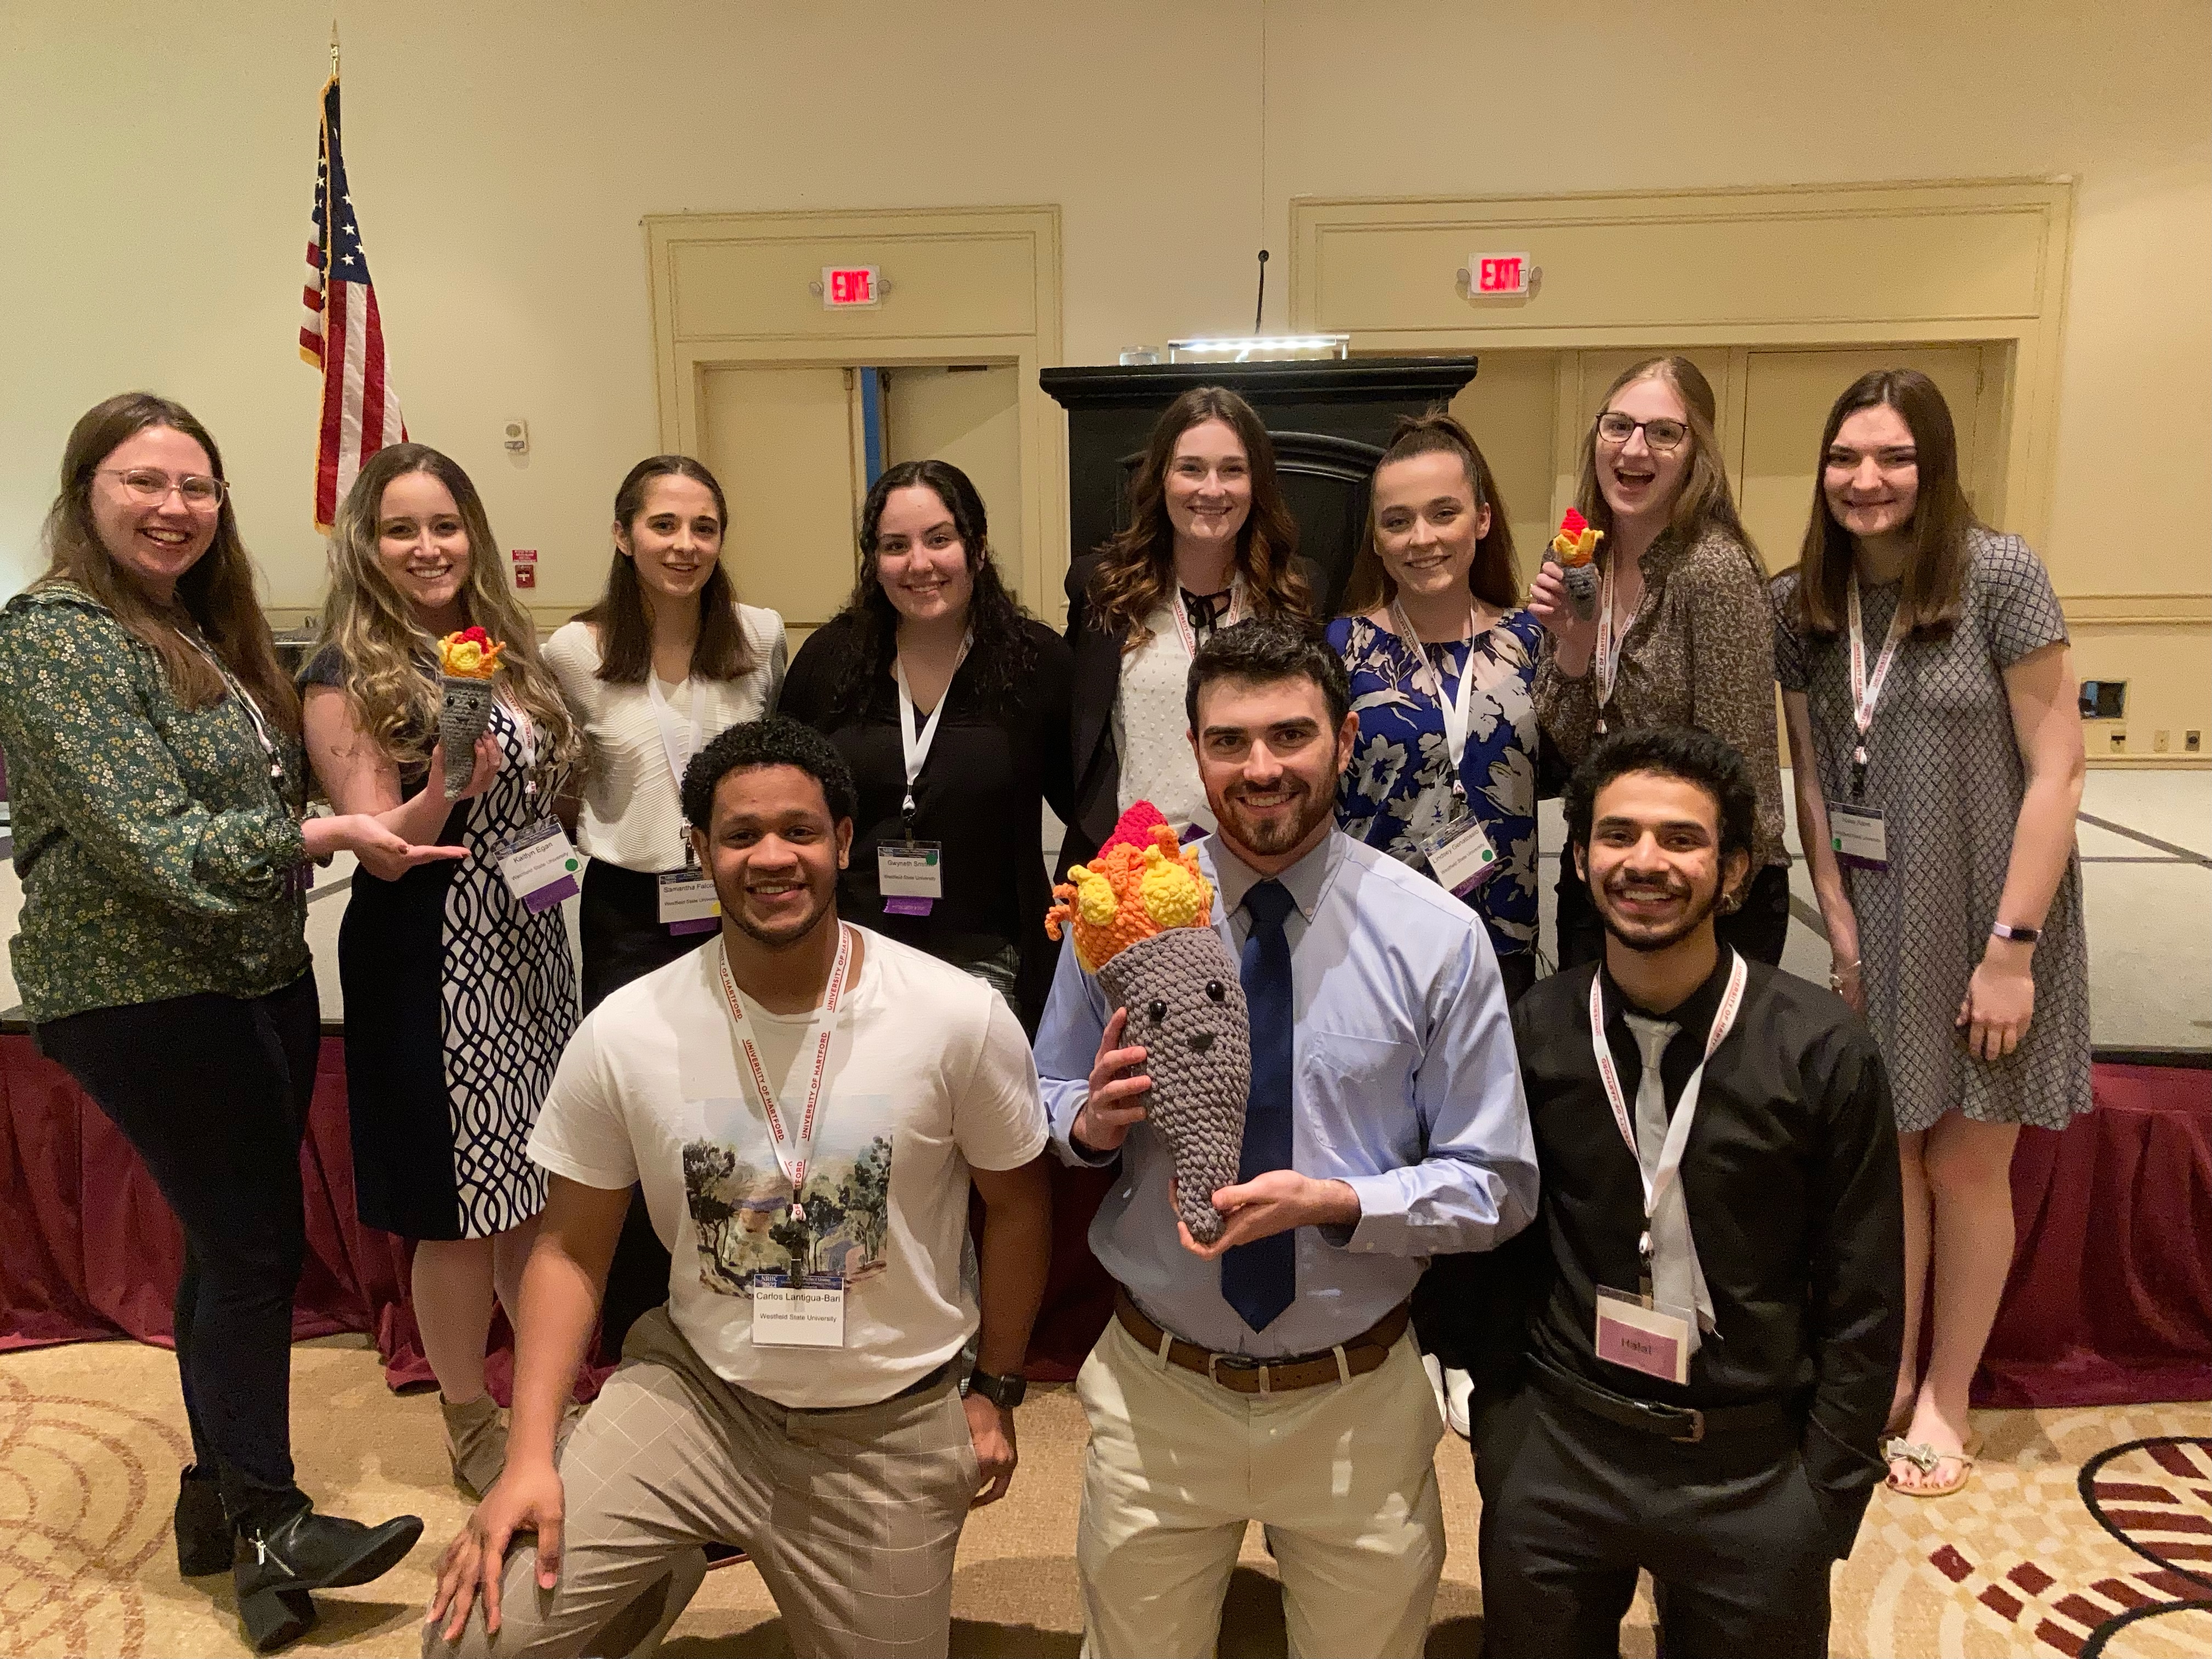 Squirrel Squire becomes an award-winning newsletter at the Northeast Regional Honors Conference.